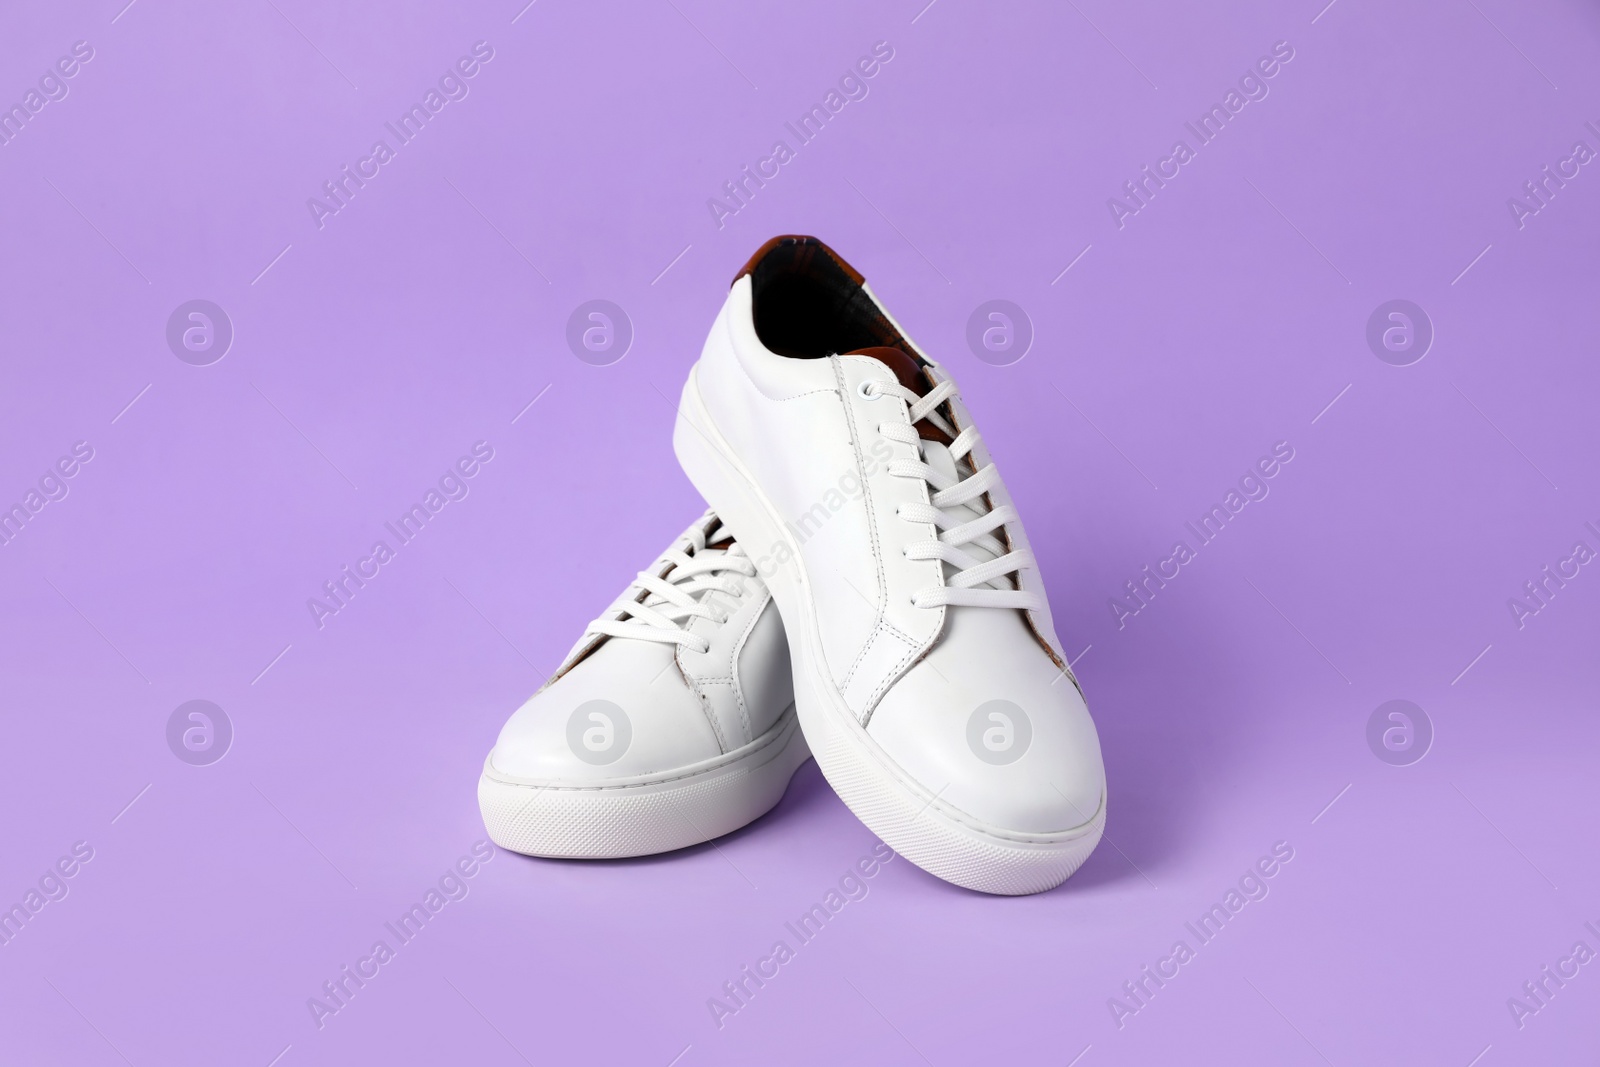 Photo of Pair of stylish white sneakers on violet background